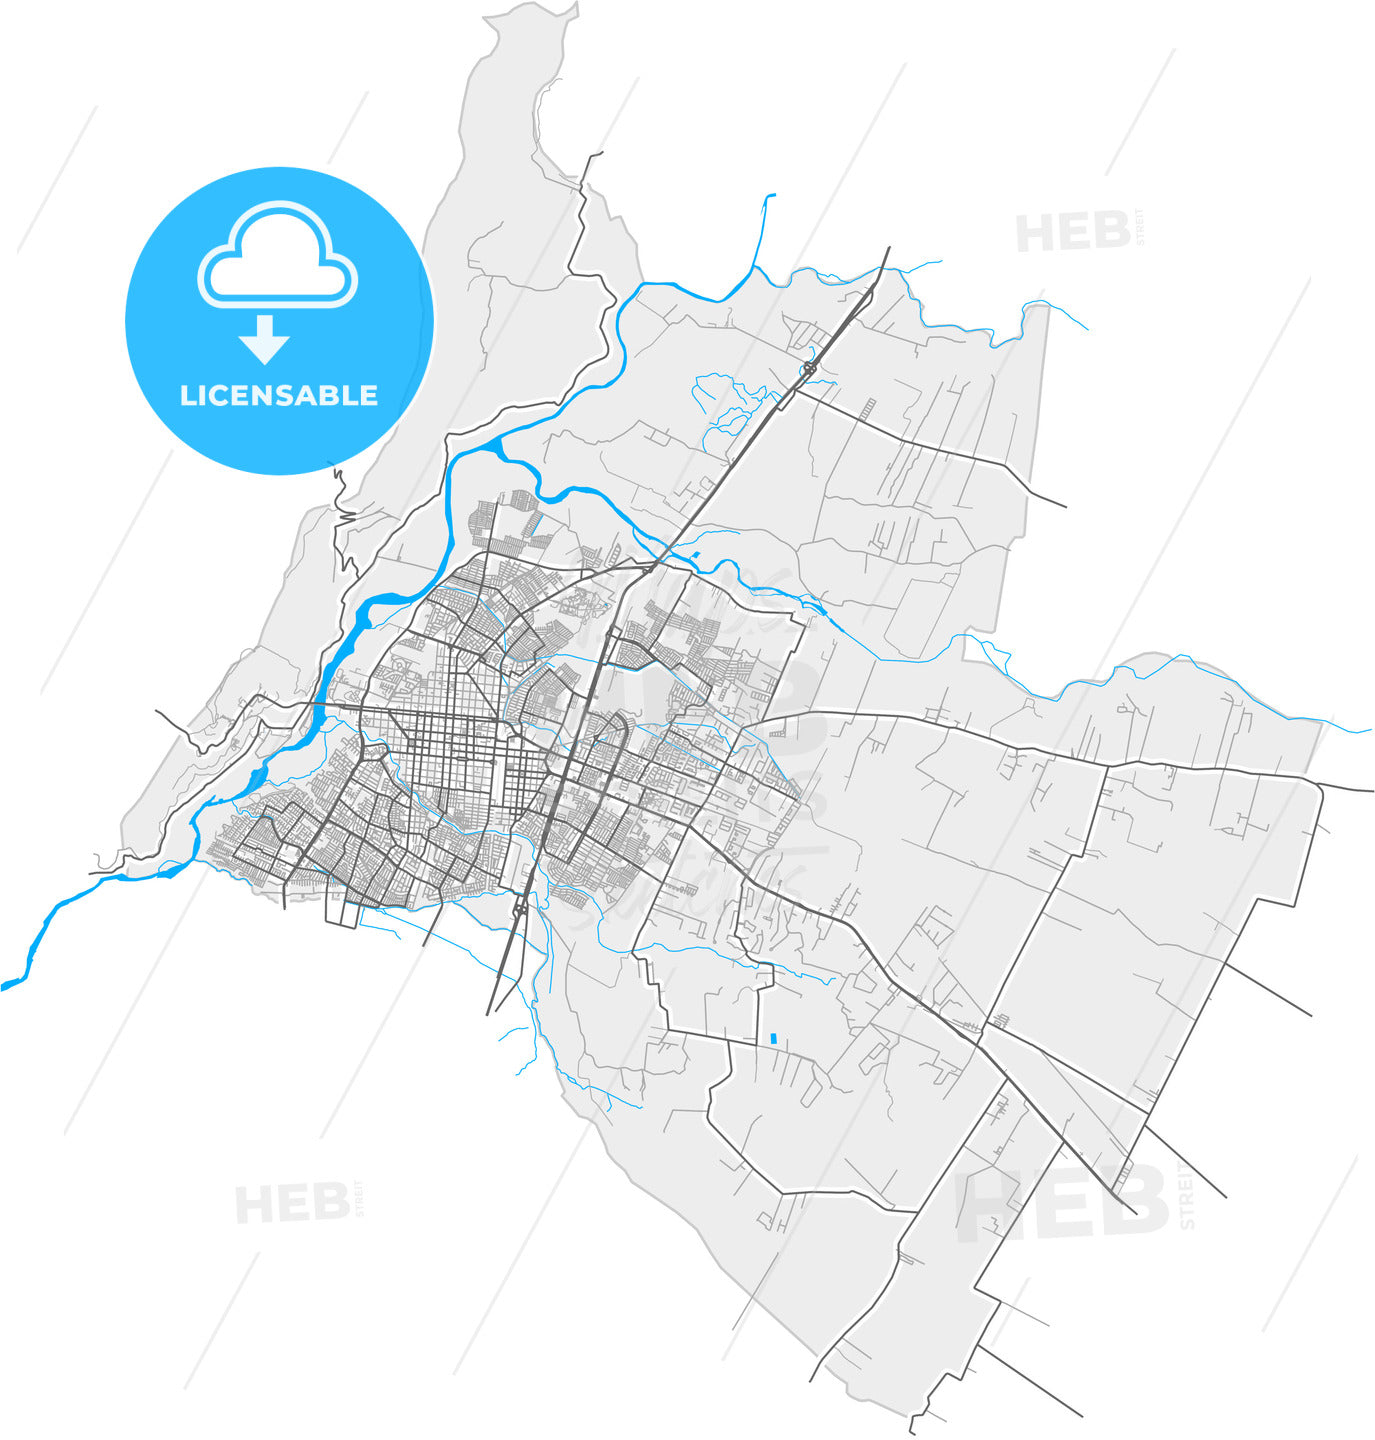 Talca, Chile, high quality vector map